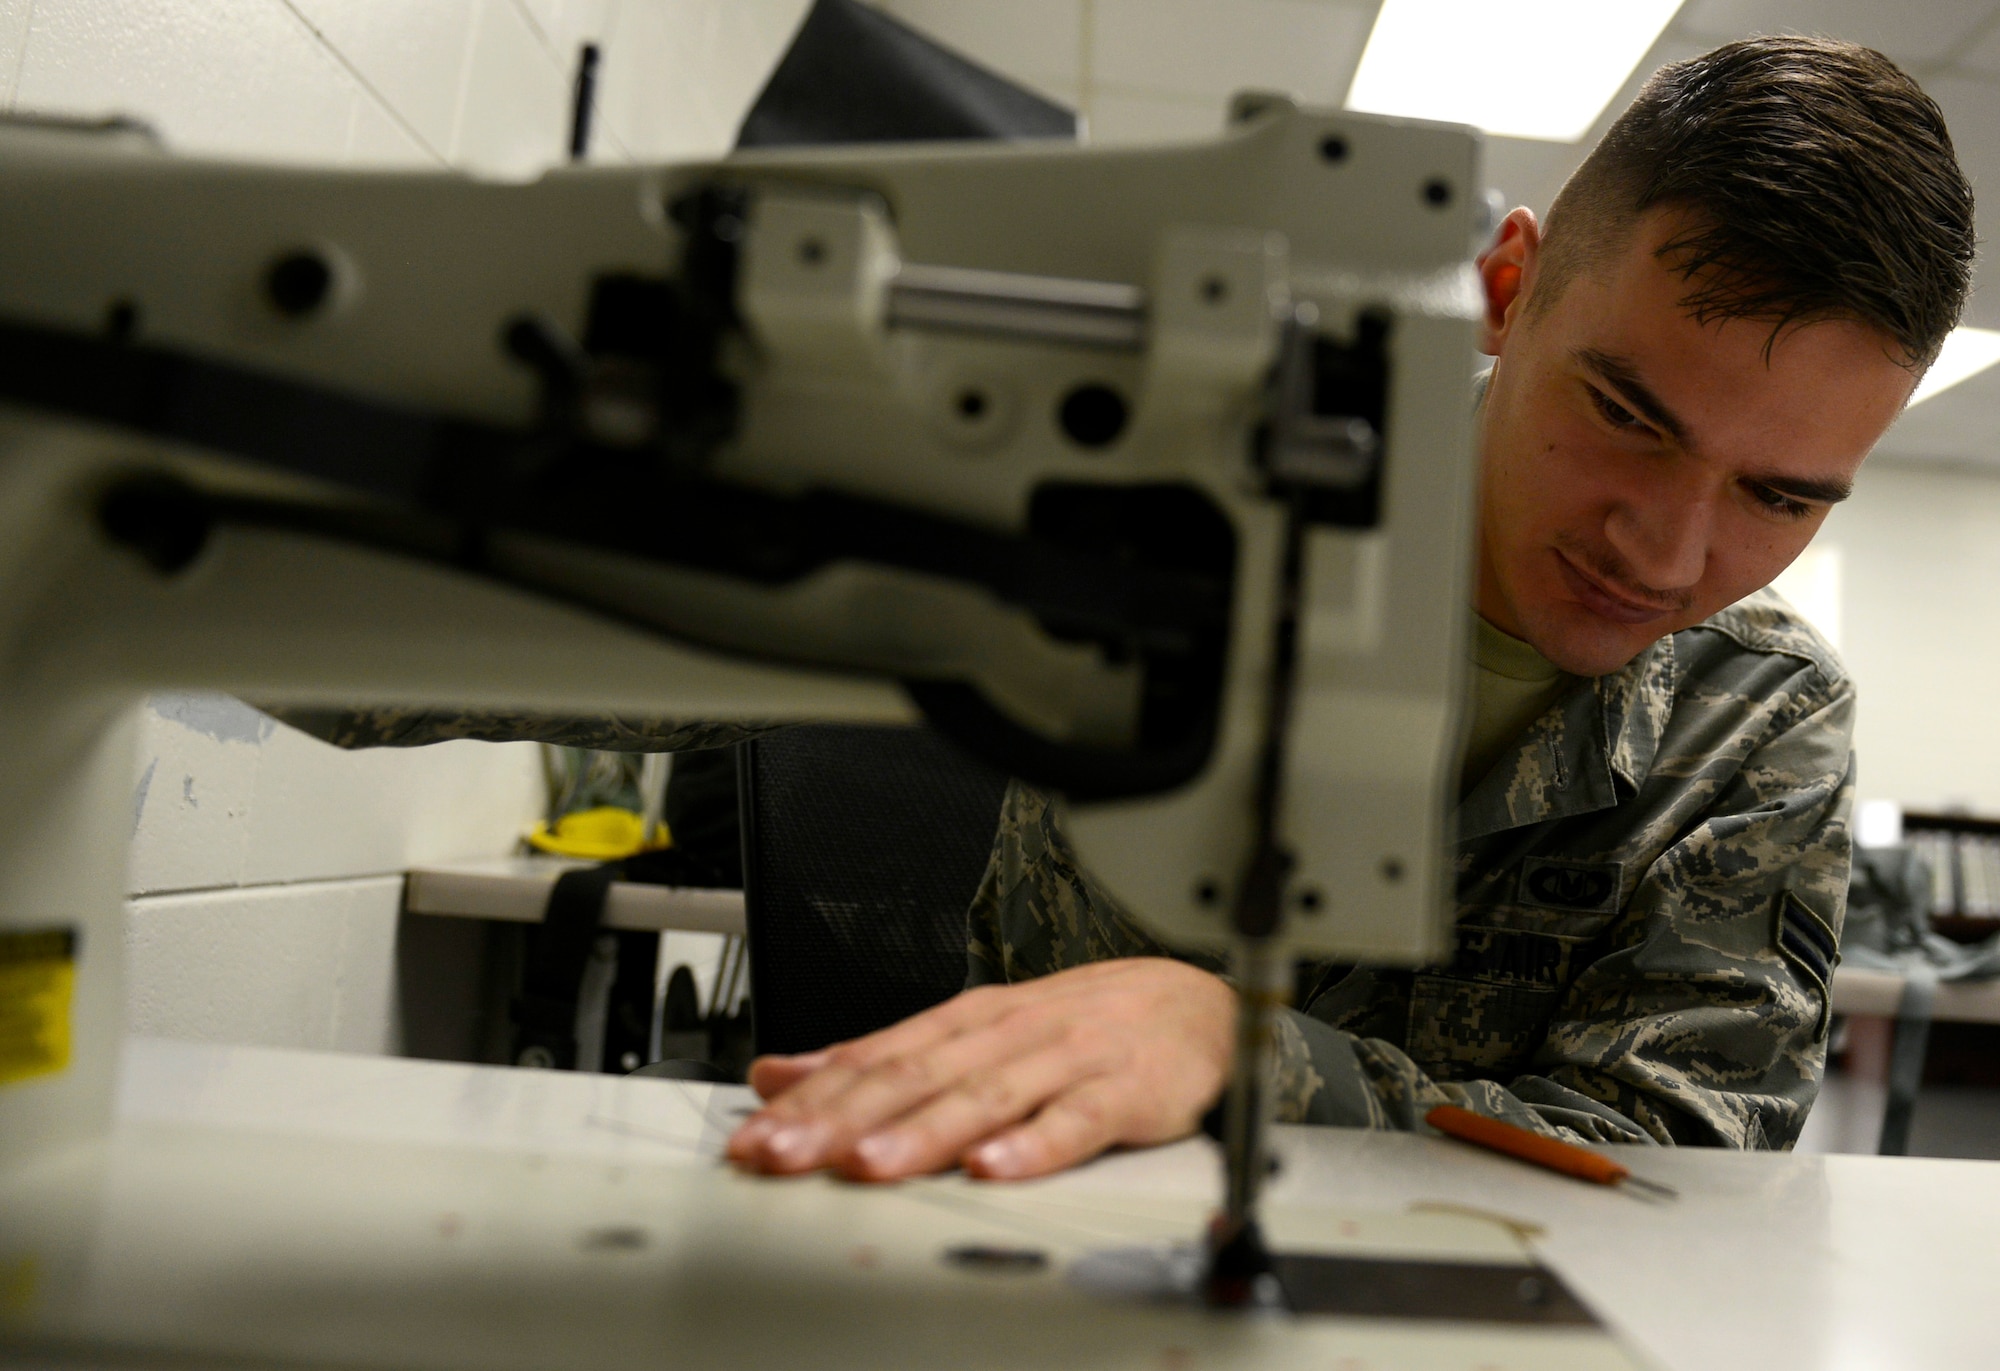 U.S. Air Force Airman 1st Class Kyle Denzine, 20th Operation Support Squadron aircrew flight equipment specialist, rigs a locking loop to hold down the pilot parachute to a mortar tube at Shaw Air Force Base, S.C., Oct. 6, 2015. These loops are replaced during every annual inspection to reduce the possibility of a premature deployment. The locking loop holds down the pilot parachute which is used to pull the C9 canopy from the ACES II container during egress. (U.S. Air Force photo by Airman 1st Class Christopher Maldonado/Released)